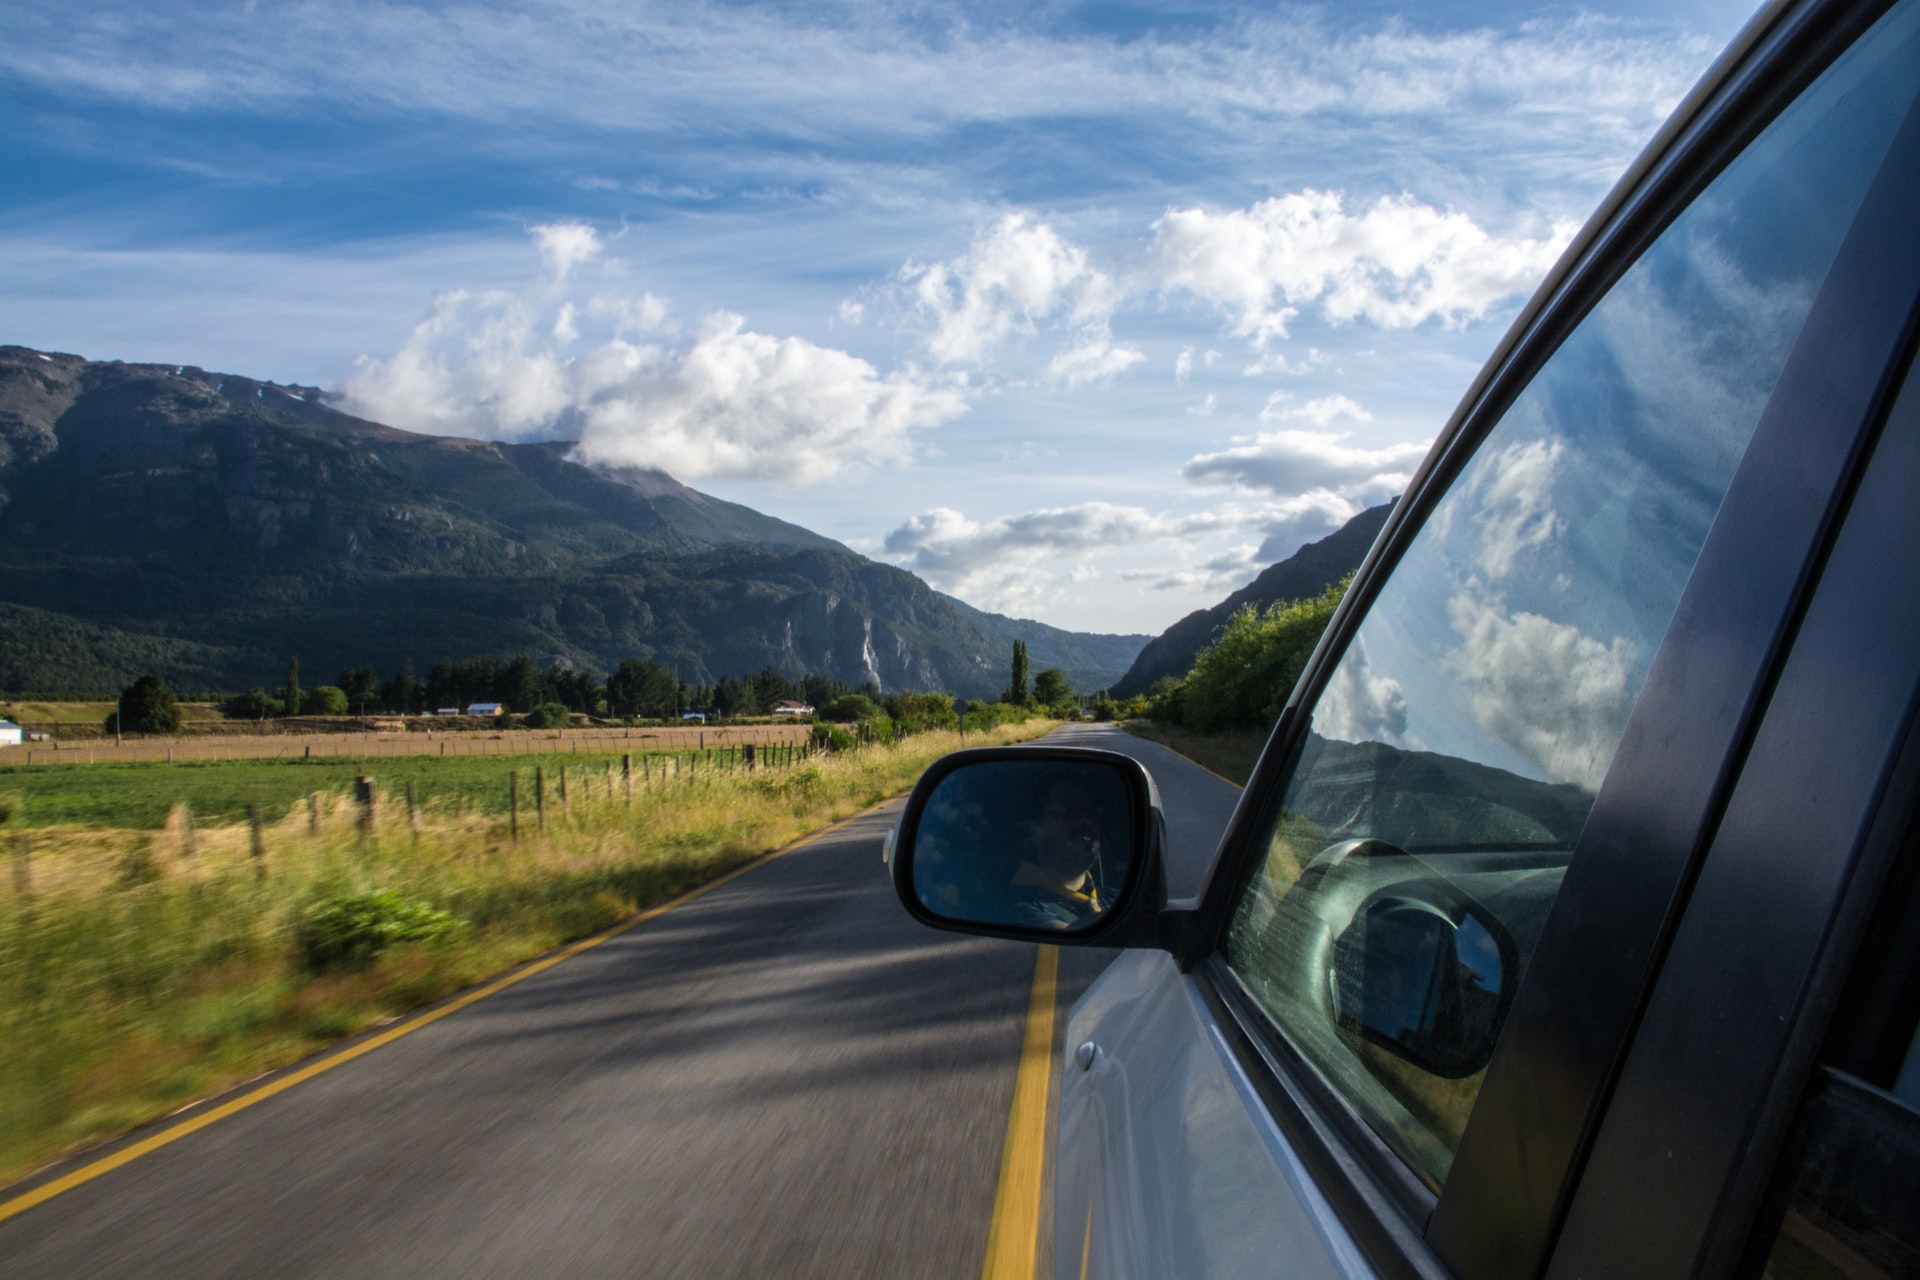 a car on the road with mountains and green pastures ahead